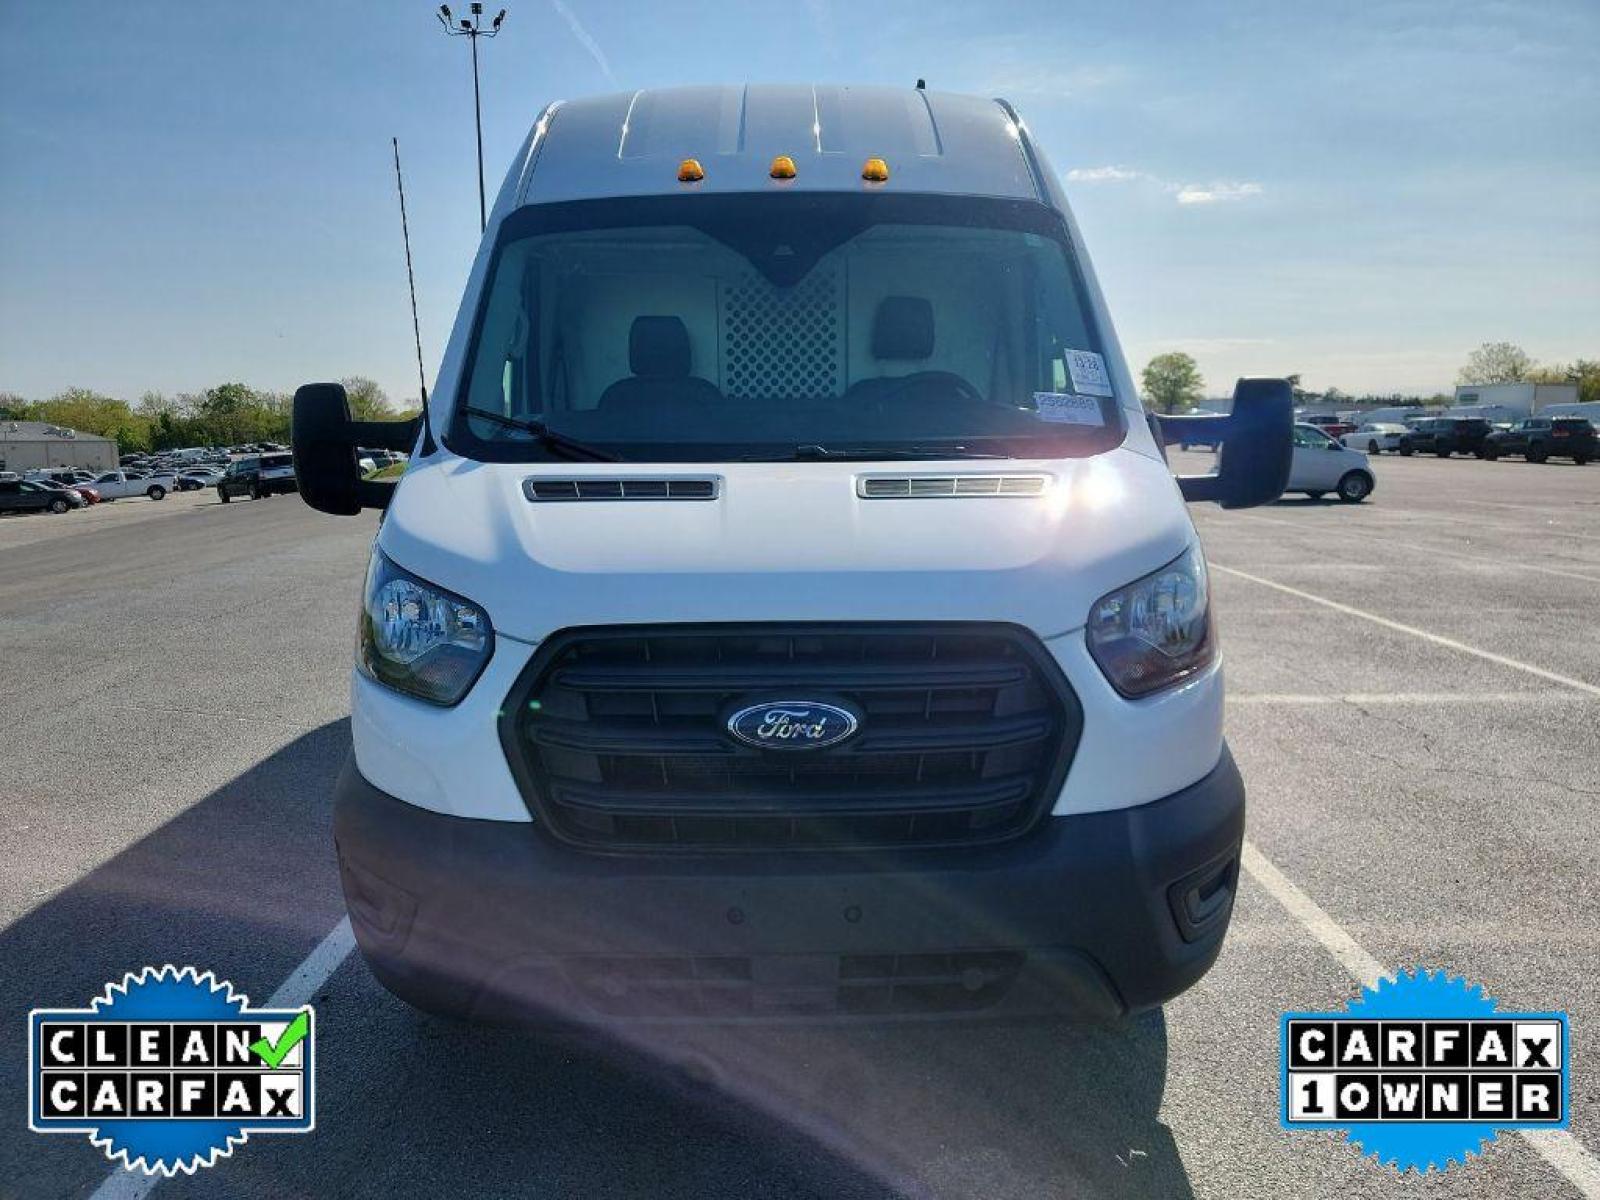 2020 Oxford White /Dark Palazzo Ford Transit Van Base w/10,360 lb. GVWR (1FTRS4XG8LK) with an V6, 3.5L engine, 10-speed automatic transmission, located at 3147 E Independence Blvd, Charlotte, NC, 28205, 35.200268, -80.773651 - <b>Equipment</b><br>See what's behind you with the back up camera on this unit. Good News! This certified CARFAX 1-owner vehicle has only had one owner before you. This unit features a hands-free Bluetooth phone system. It has a clean CARFAX vehicle history report. The rear parking assist technology - Photo #1